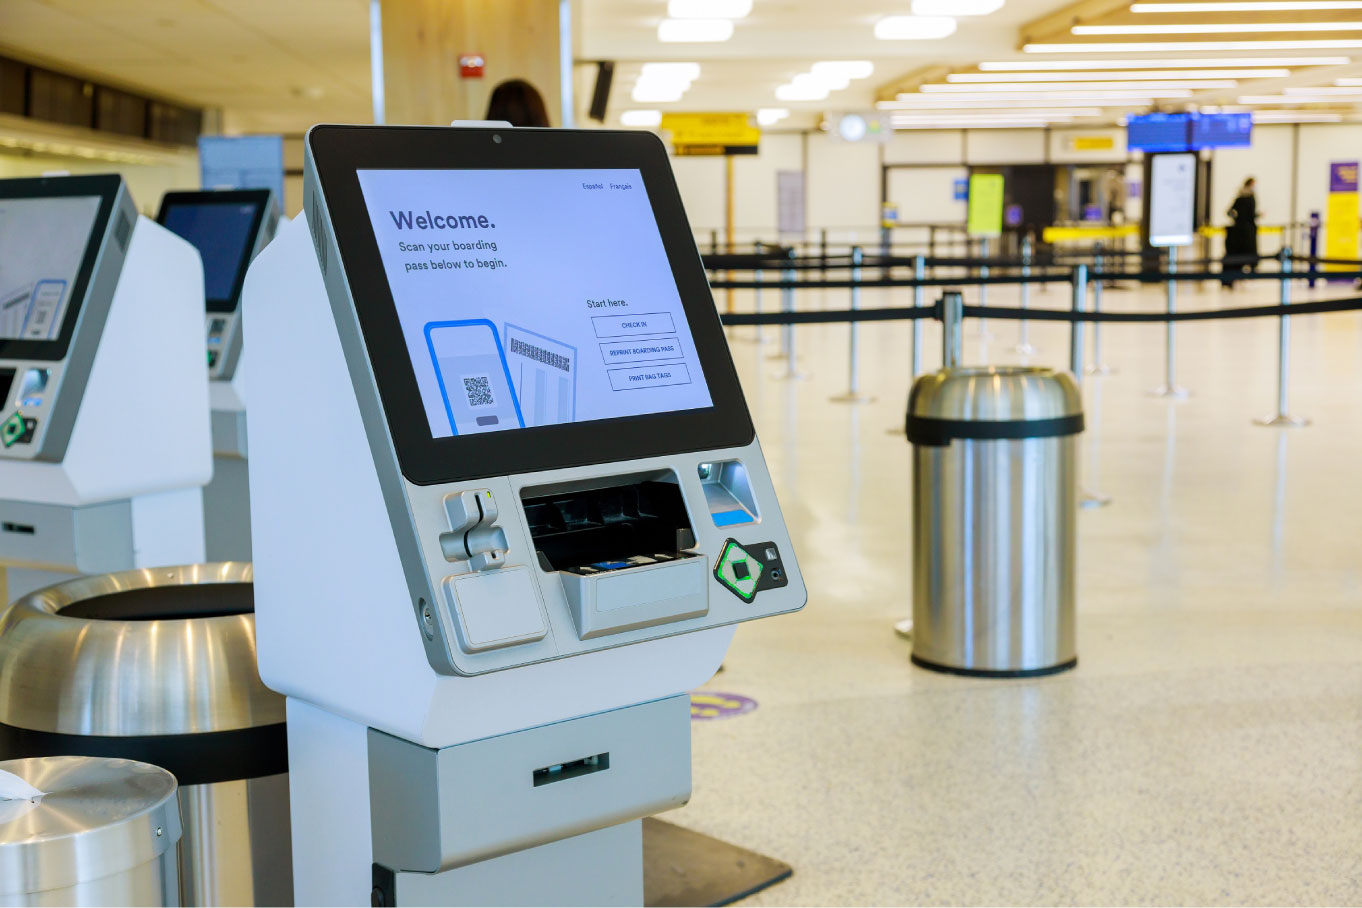 Kiosk management system placed on an airport